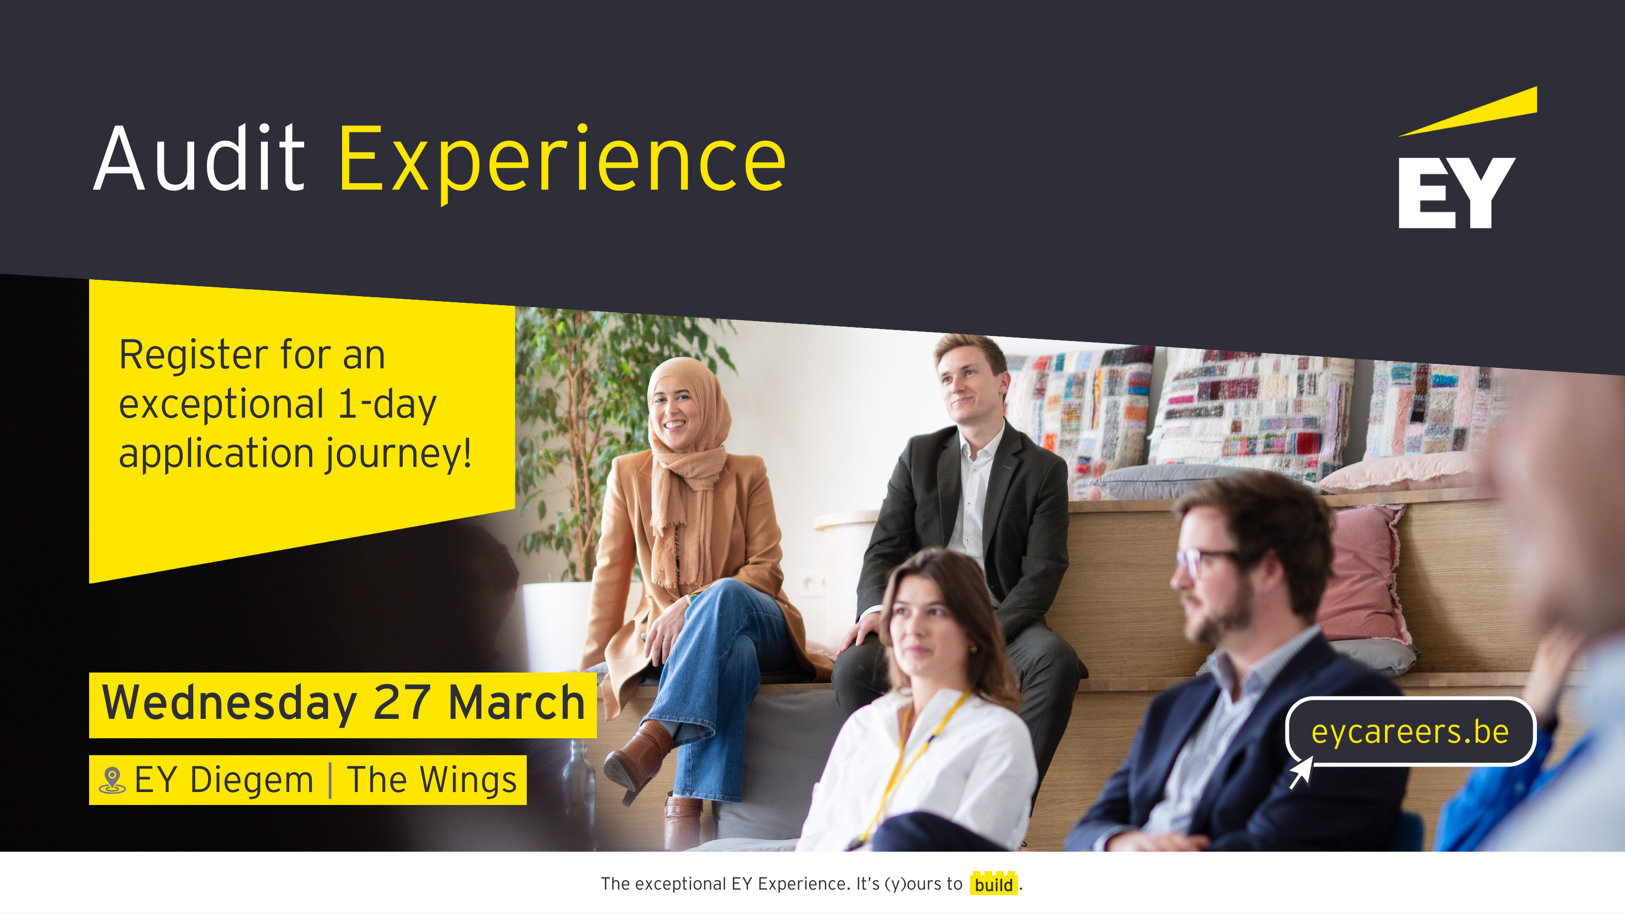 ey-audit-experience